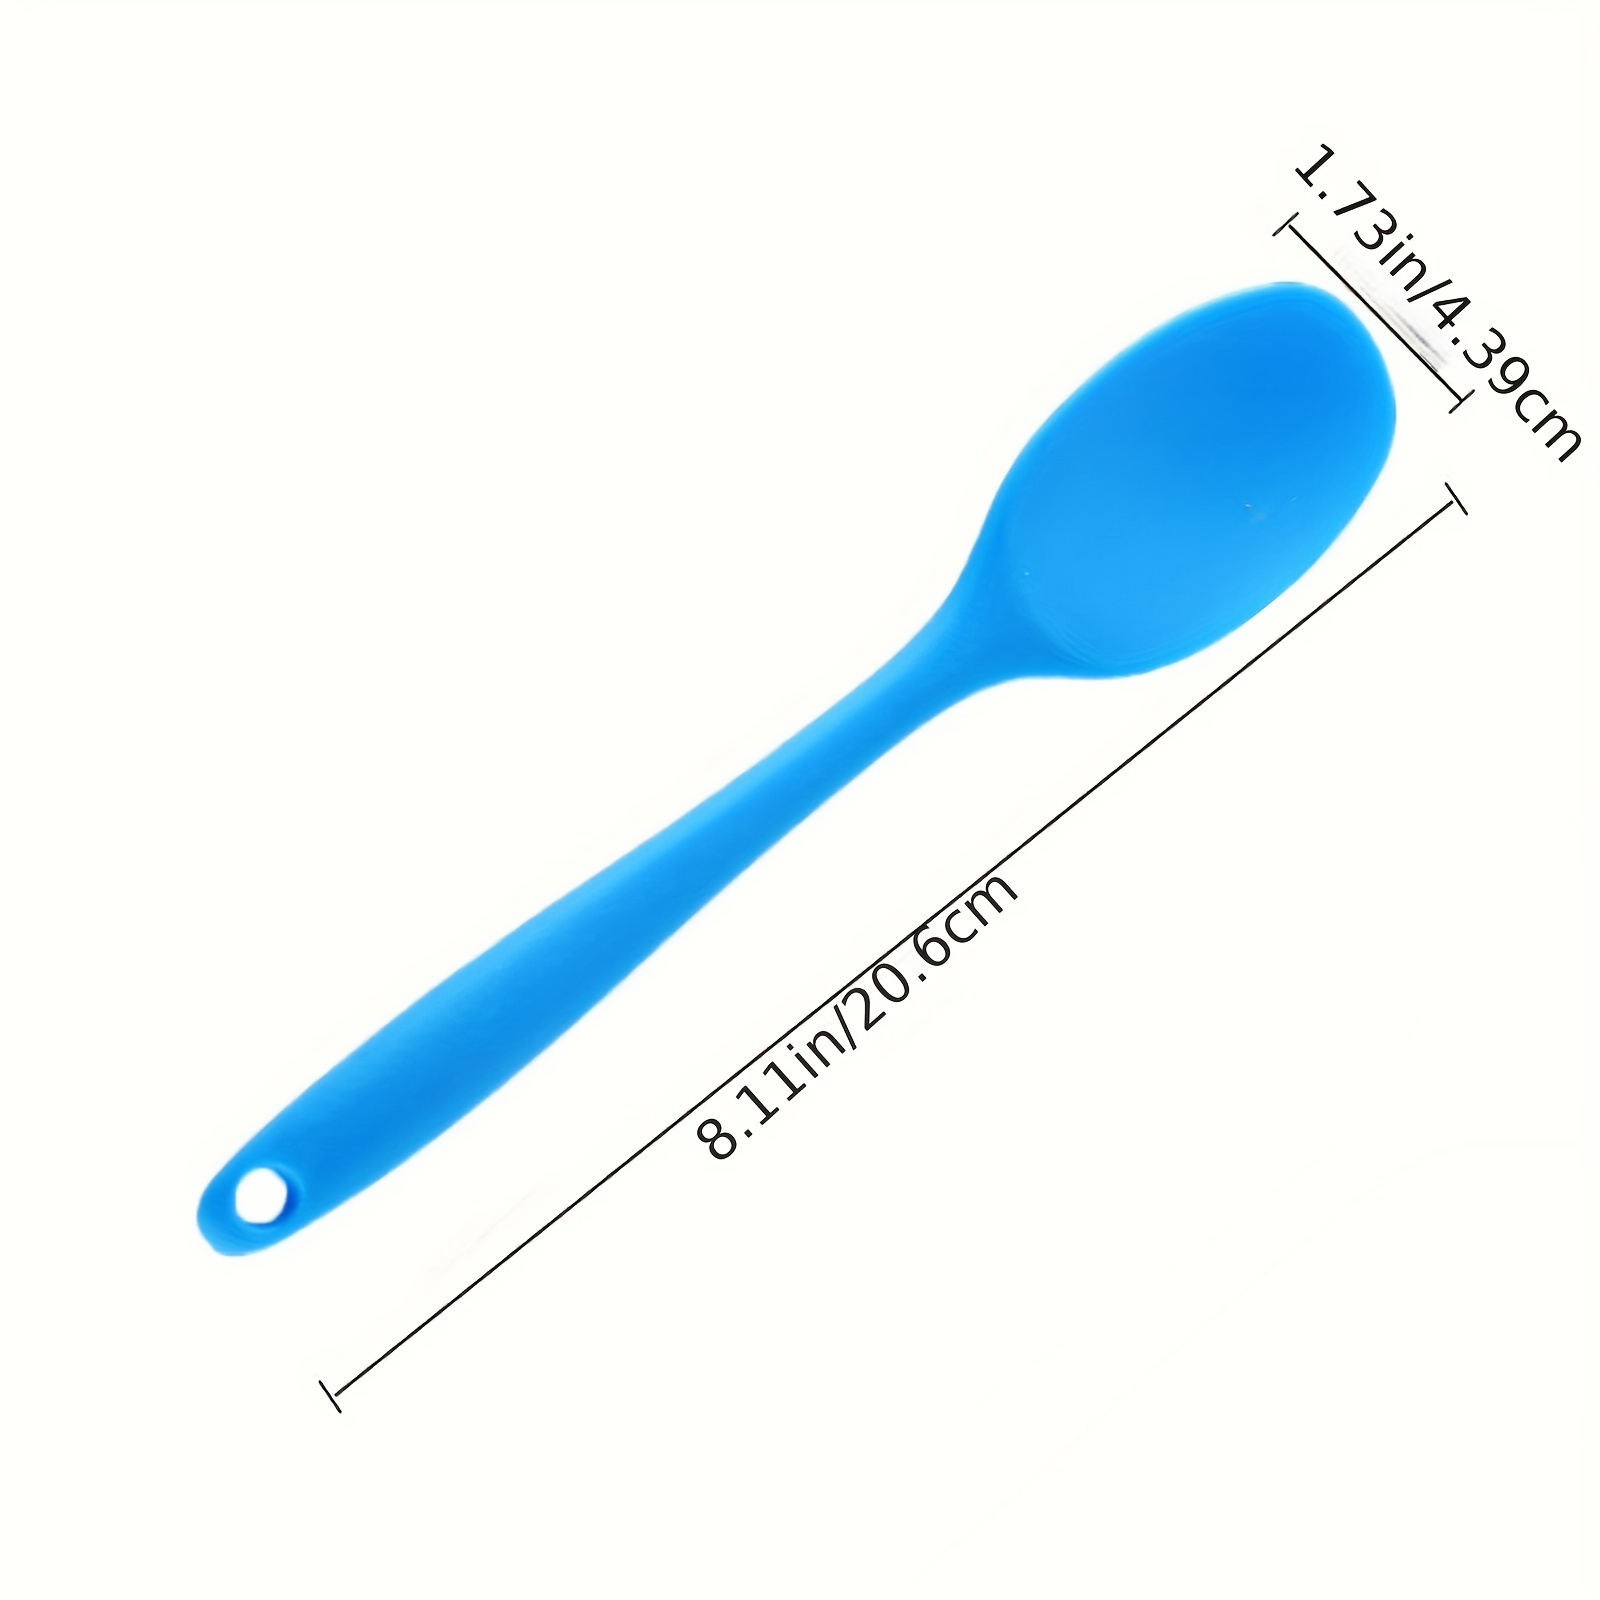 4 Pieces Silicone Mixing Spoon Heat Resistant Basting Spoon Utensil Spoon  Non-stick Spoon for Mixing, Baking, Serving and Stirring